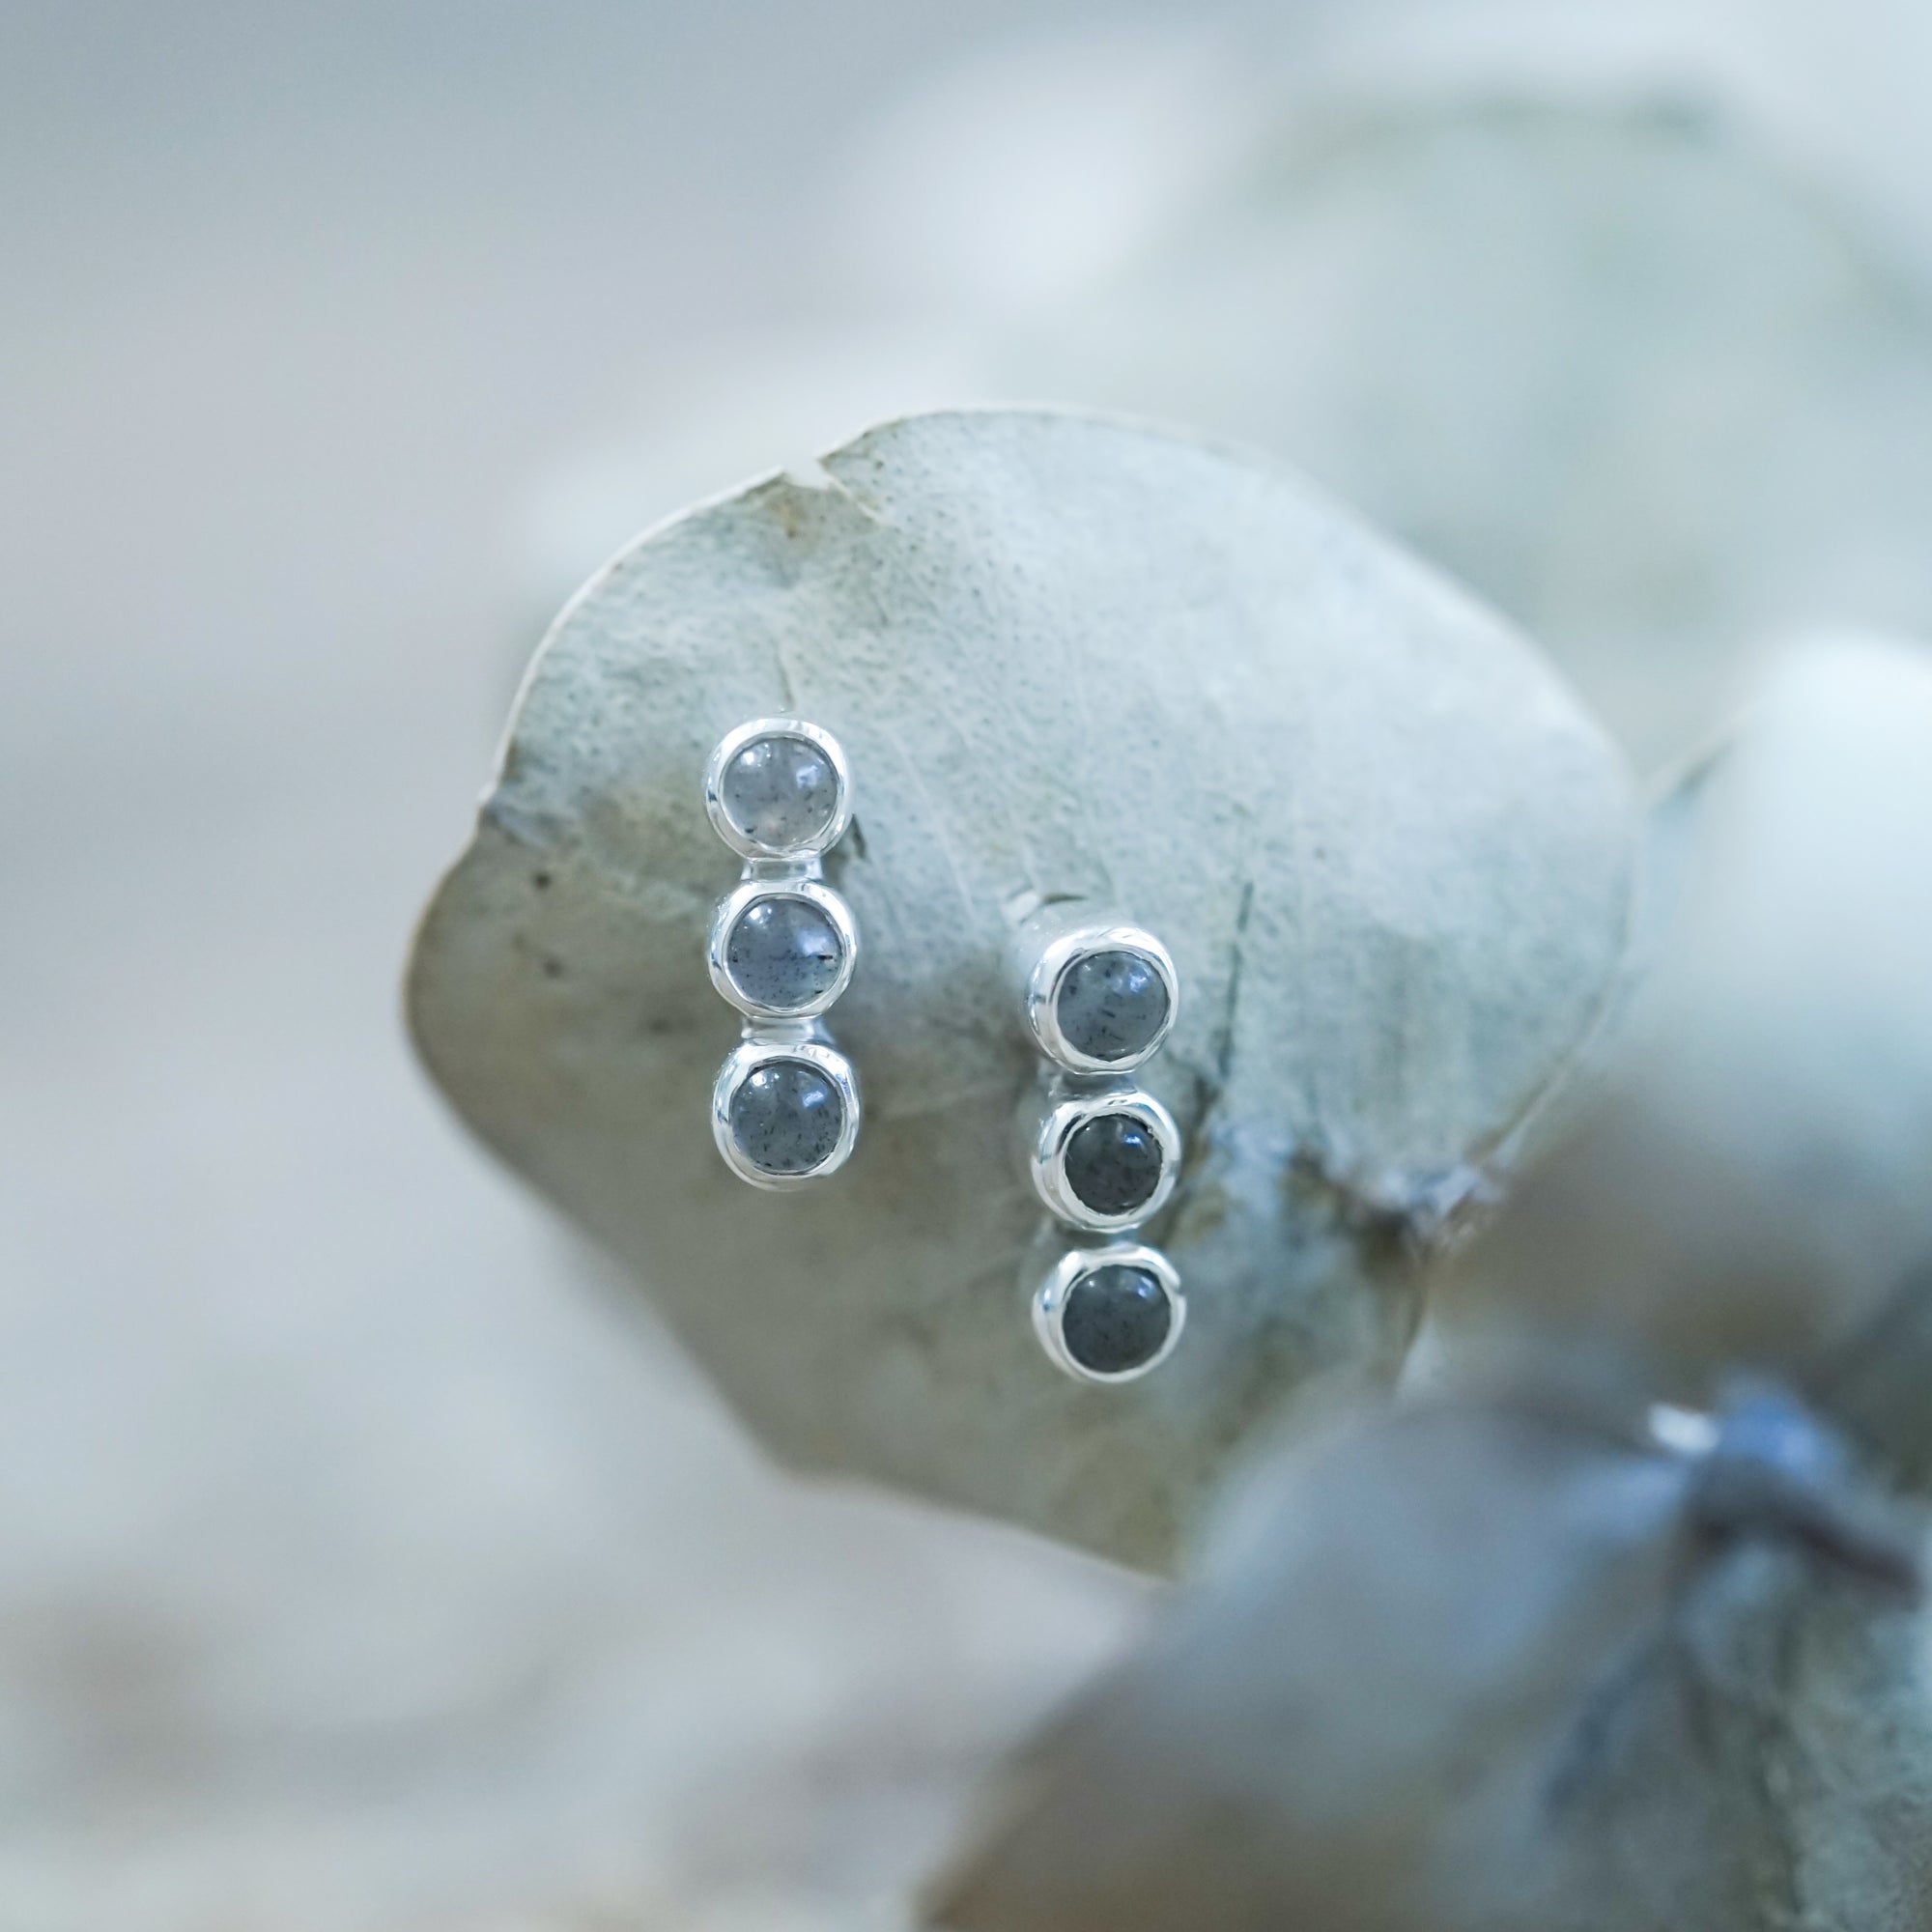 Triple Labradorite Earrings - Gardens of the Sun | Ethical Jewelry